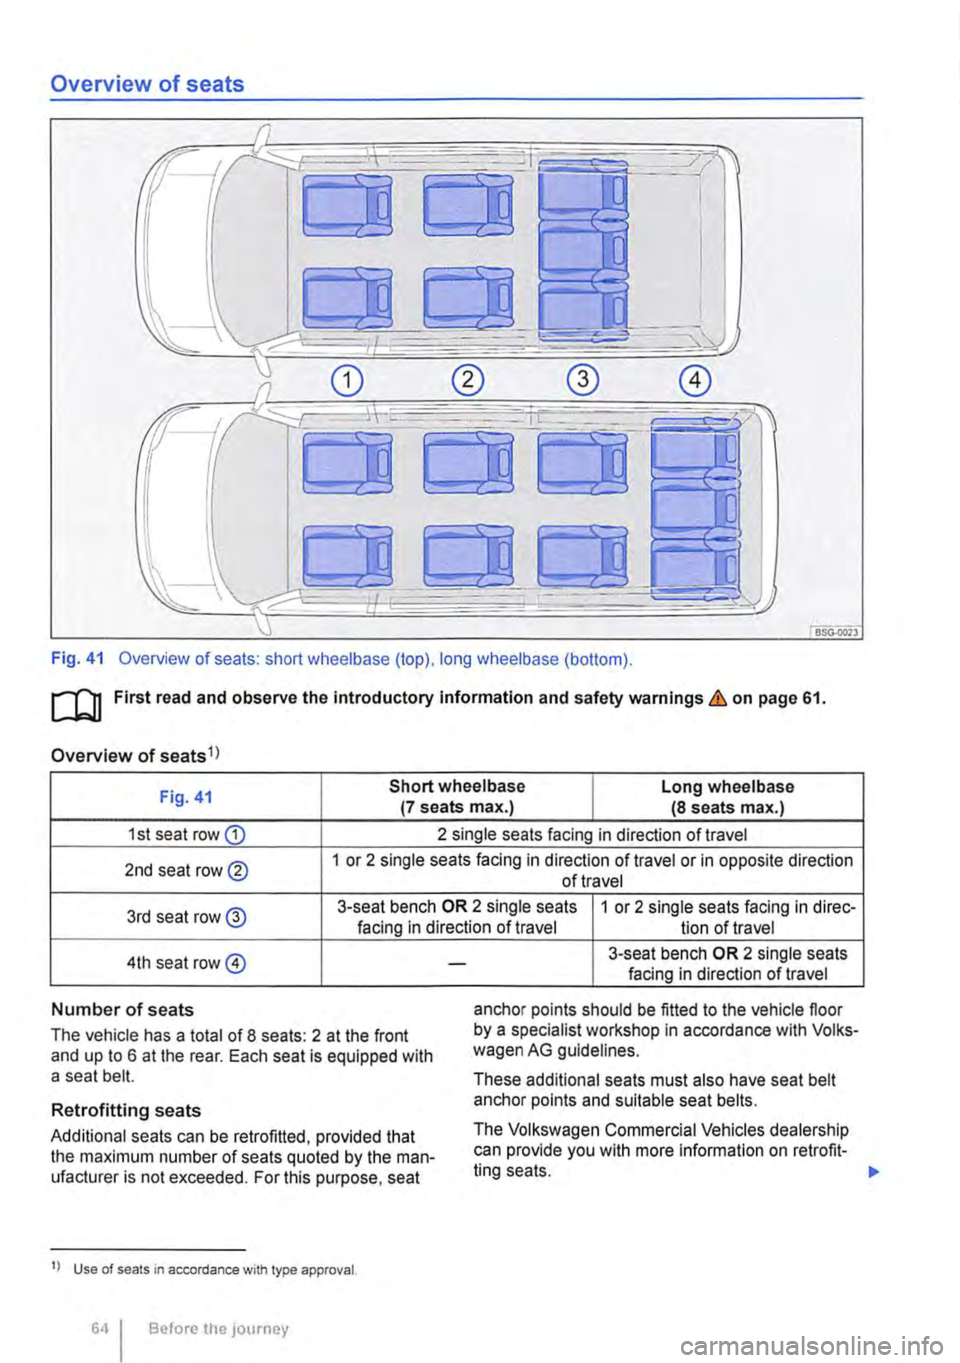 VOLKSWAGEN TRANSPORTER 2015  Owner´s Manual Overview of seats 
Fig. 41 Overview of seats: short wheelbase (top), long wheelbase (bottom). 
ro First read and observe the Introductory Information and safety warnings & on page 61. 
Overview of sea